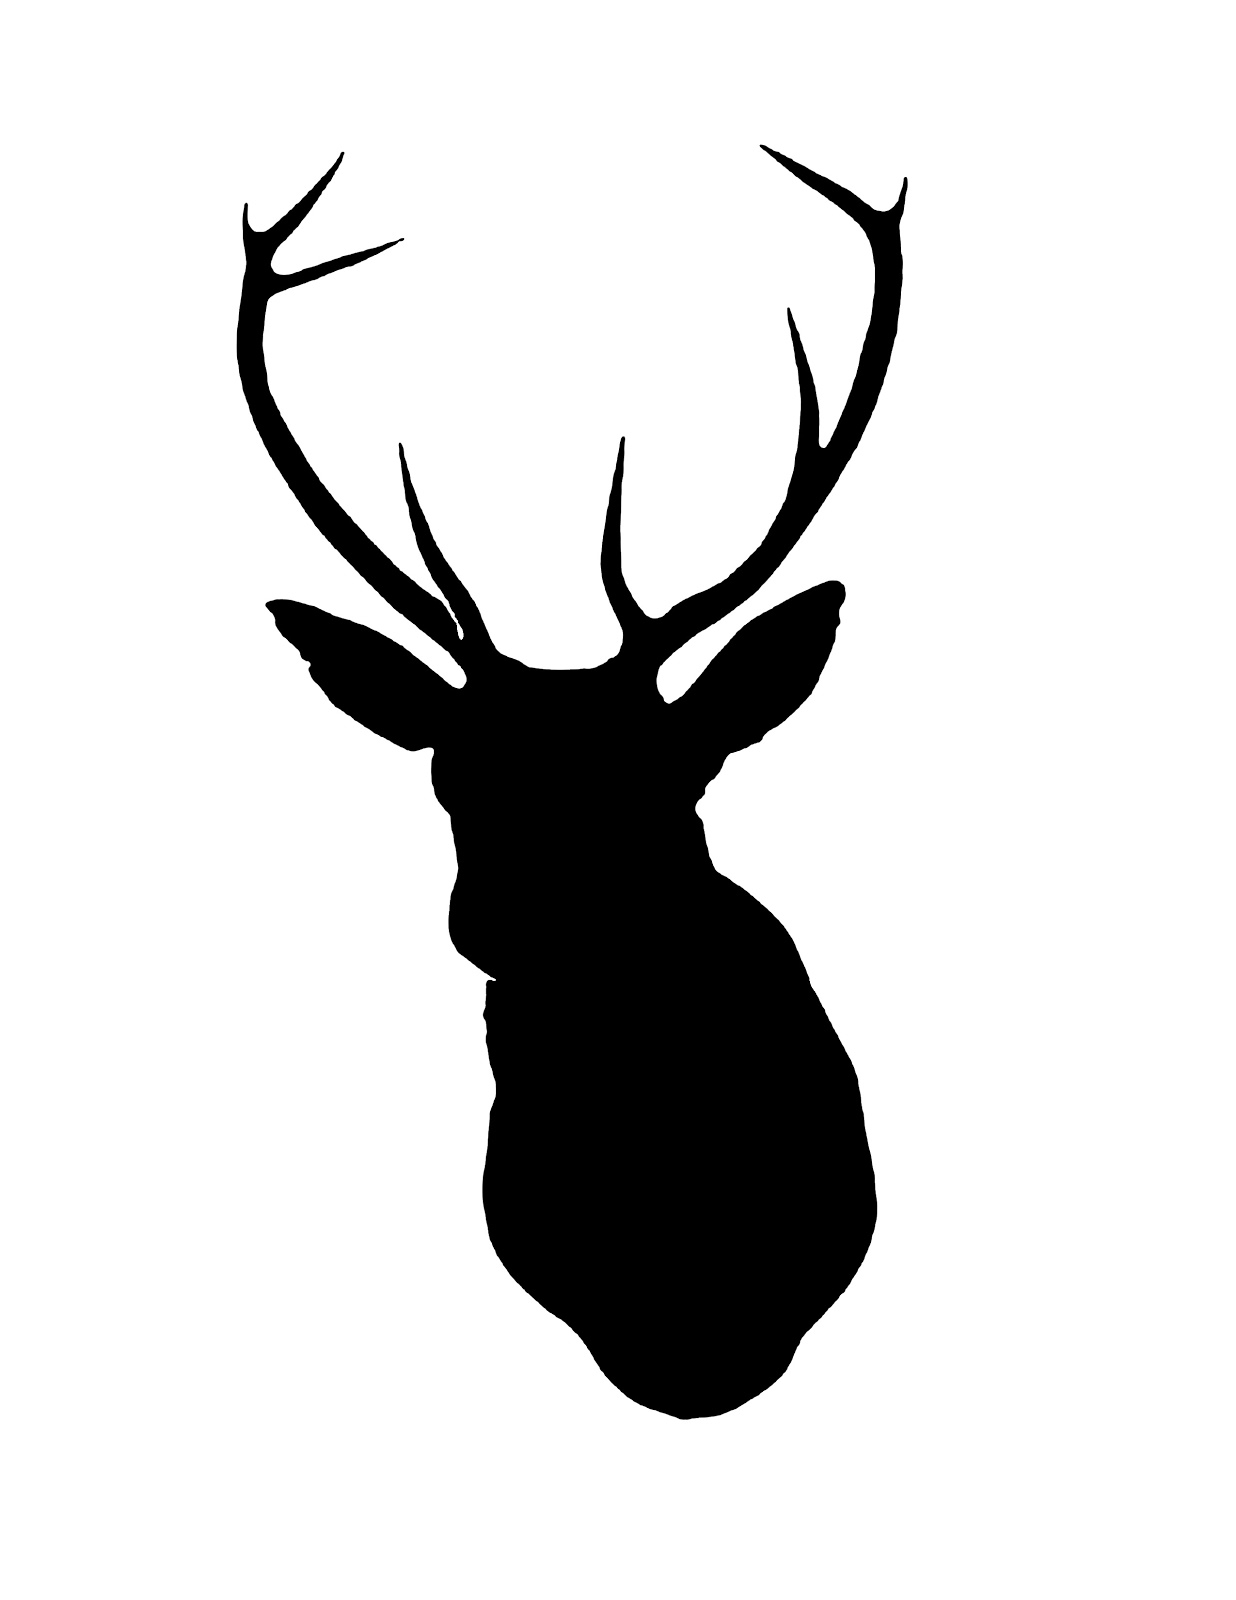 1800*1920 - Free Transparent Moose png Download. view all Reindeer Head Sil...